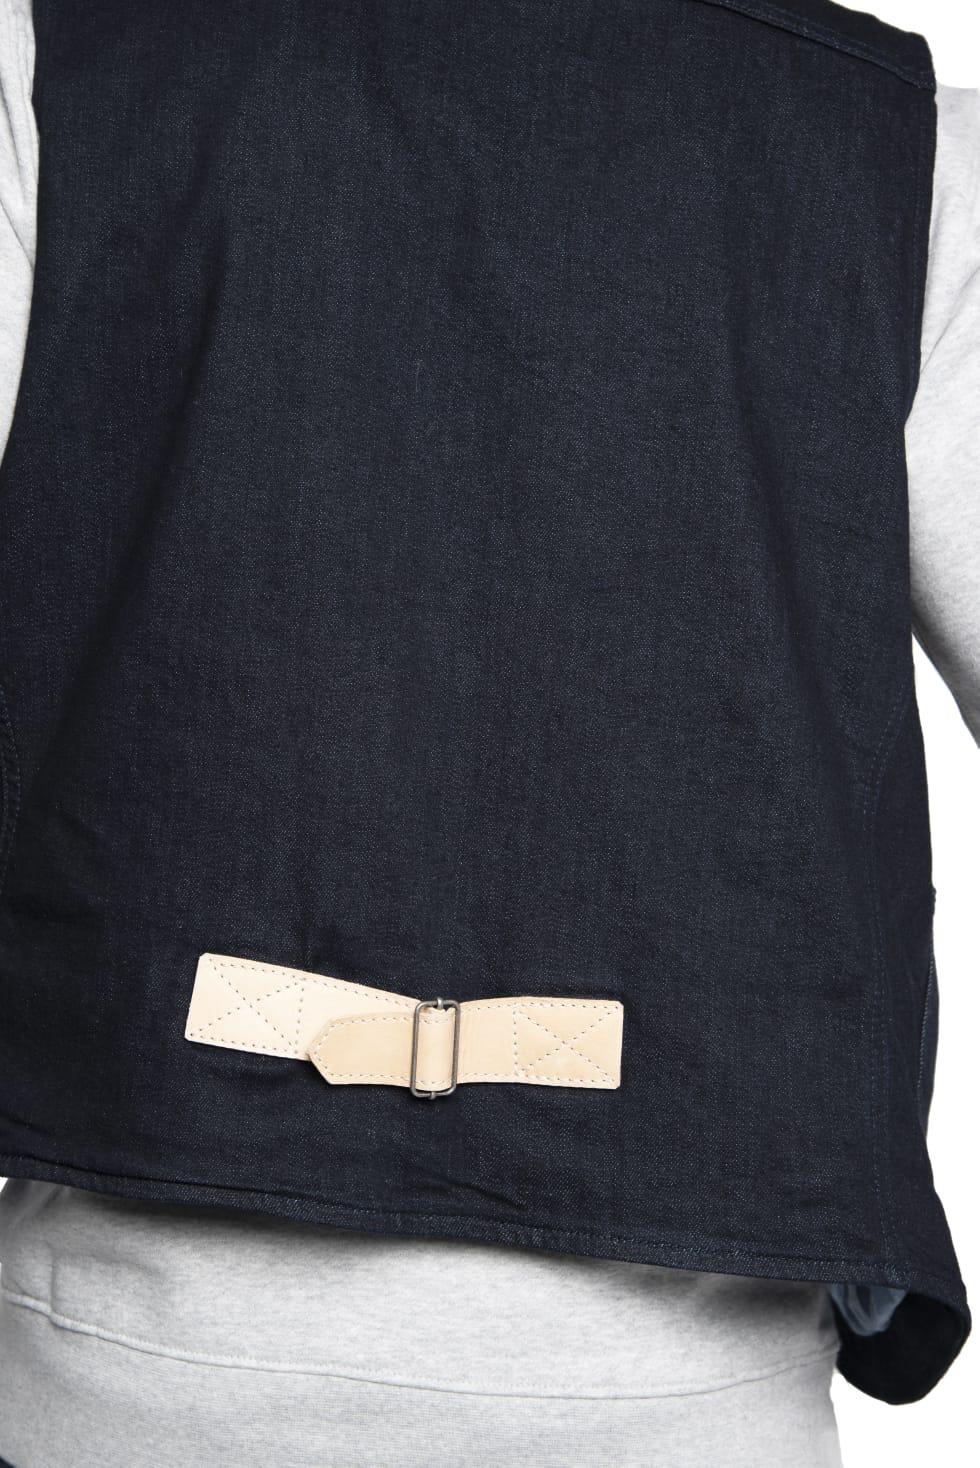 Amsterdenim X Butts and Shoulders Vest (SOLD OUT) Vest - Butts and ...